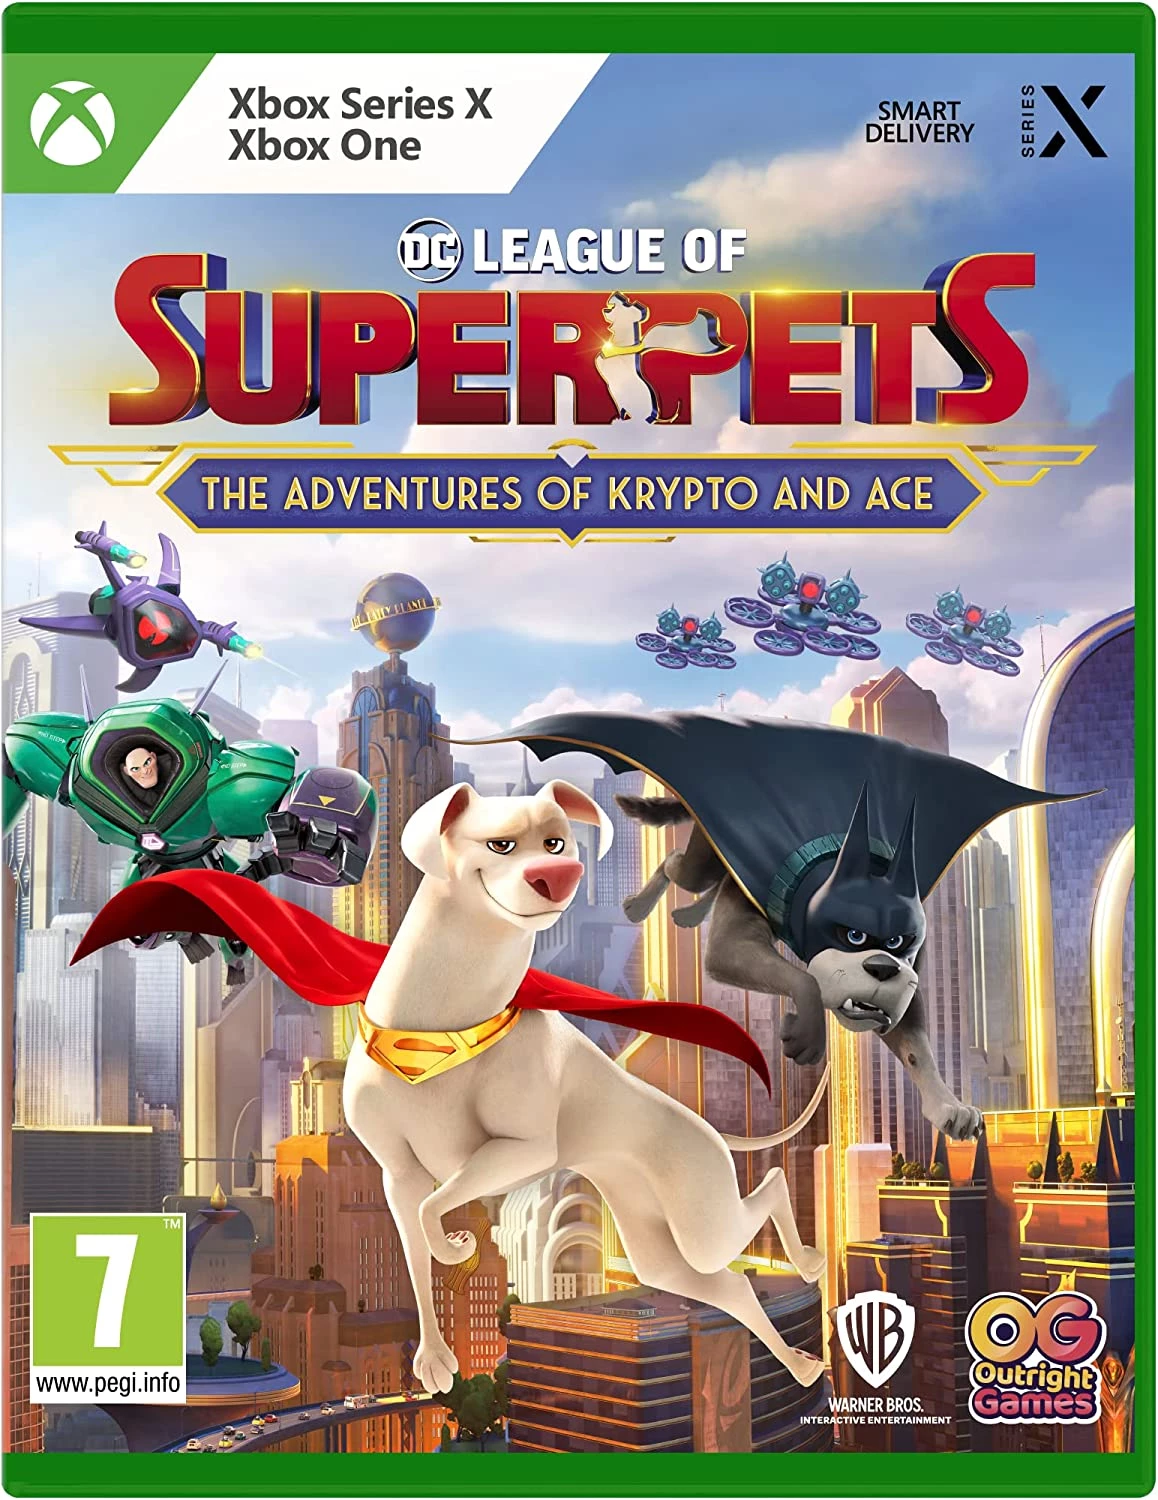 DC League of Super Pets: The Adventures of Krypto and Ace (Xbox Series X), Outright Games